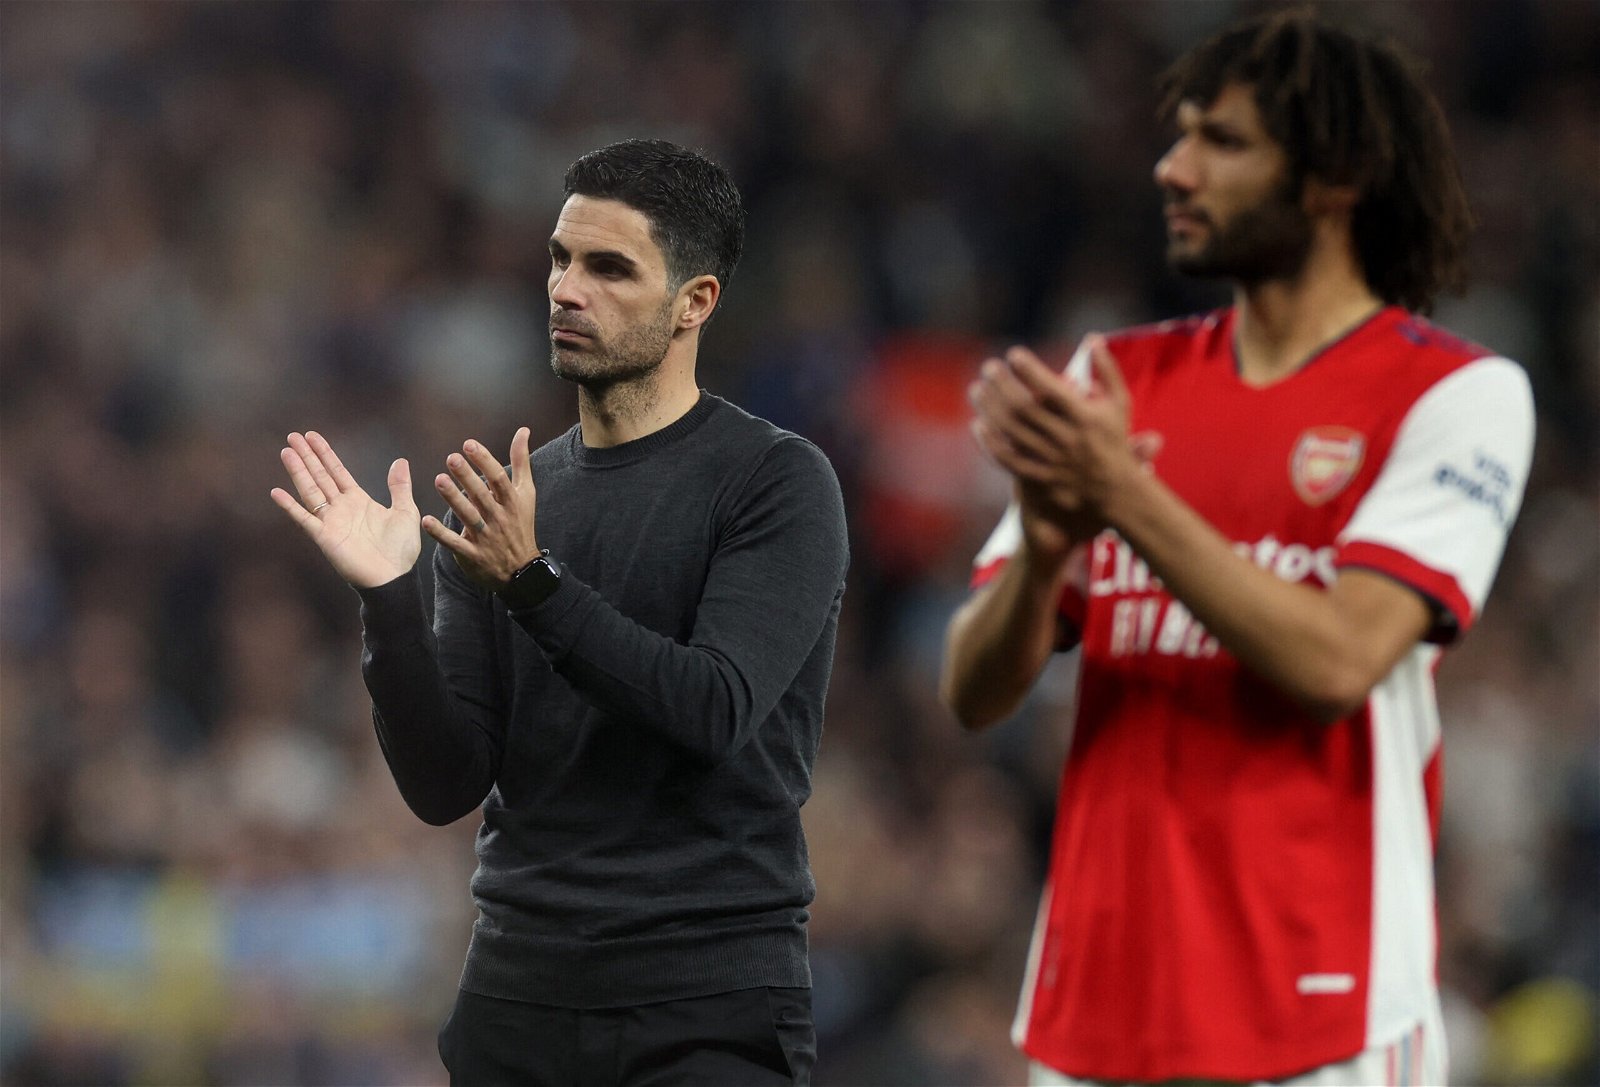 Mikel-Arteta-applauds-the-support-of-the-Arsenal-faithful-after-their-damaging-defeat-to-Spurs-in-the-Premier-League